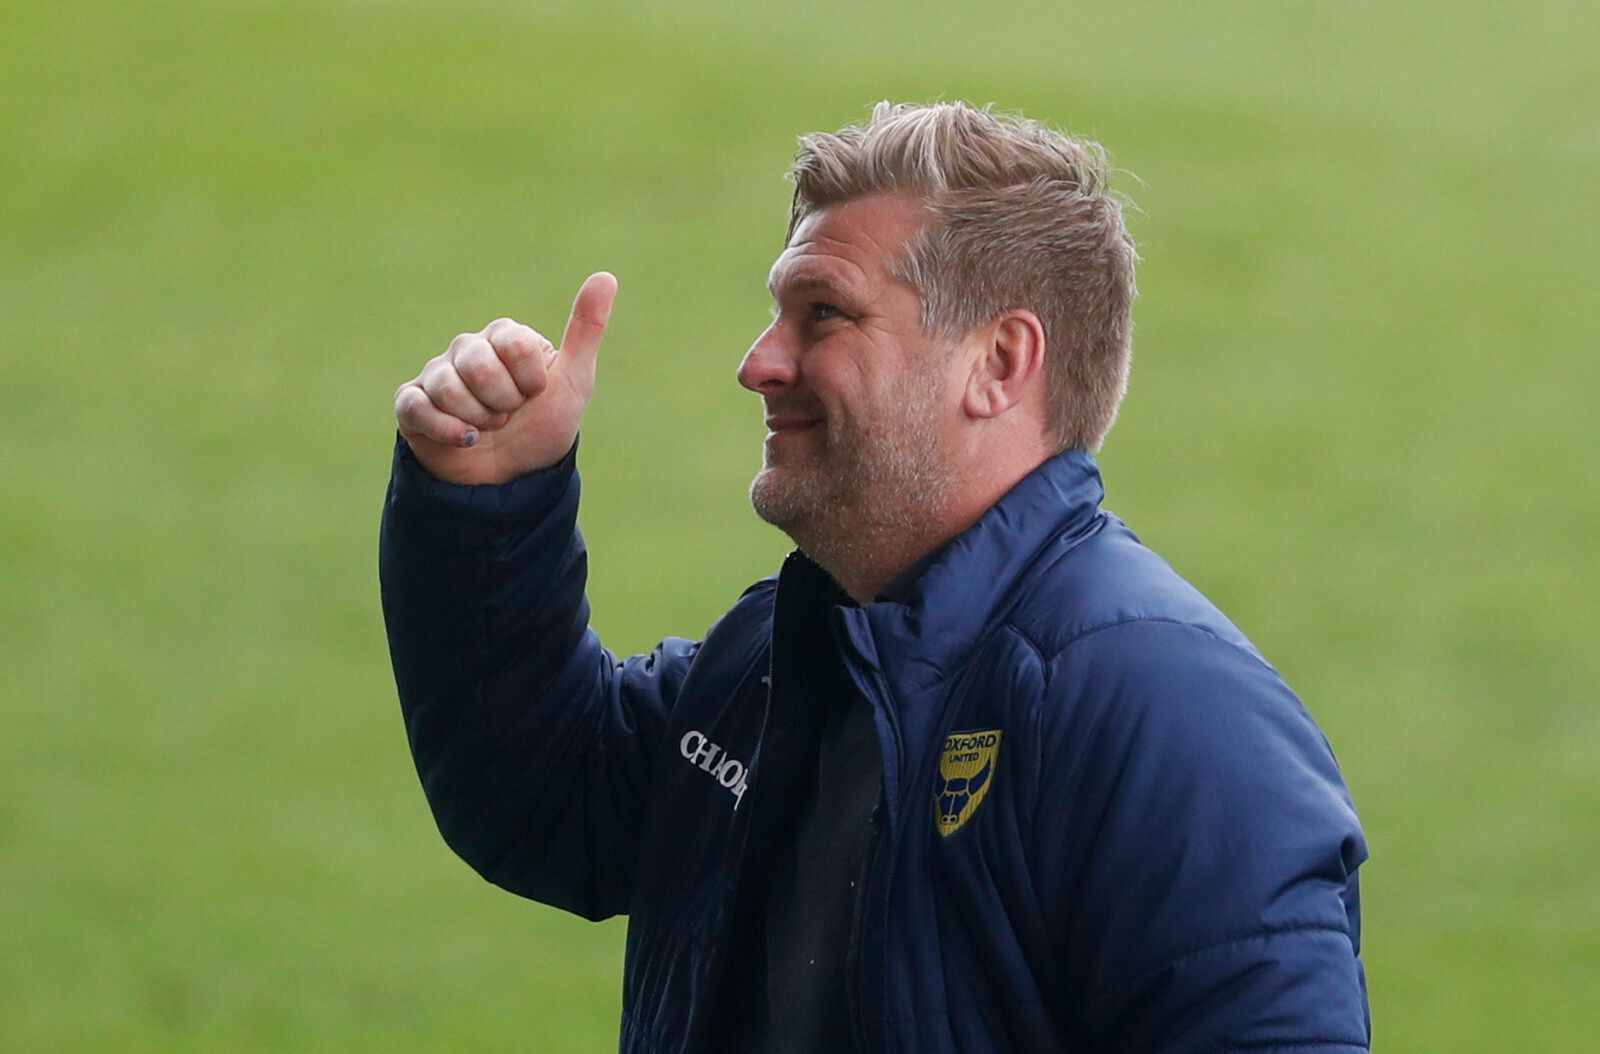 Soccer Football - League One - Oxford United v Burton Albion - Kassam Stadium, Oxford, Britain - May 9, 2021 Oxford United manager Karl Robinson celebrates at the end of the match Action Images/Matthew Childs EDITORIAL USE ONLY. No use with unauthorized audio, video, data, fixture lists, club/league logos or 'live' services. Online in-match use limited to 75 images, no video emulation. No use in betting, games or single club /league/player publications.  Please contact your account representativ